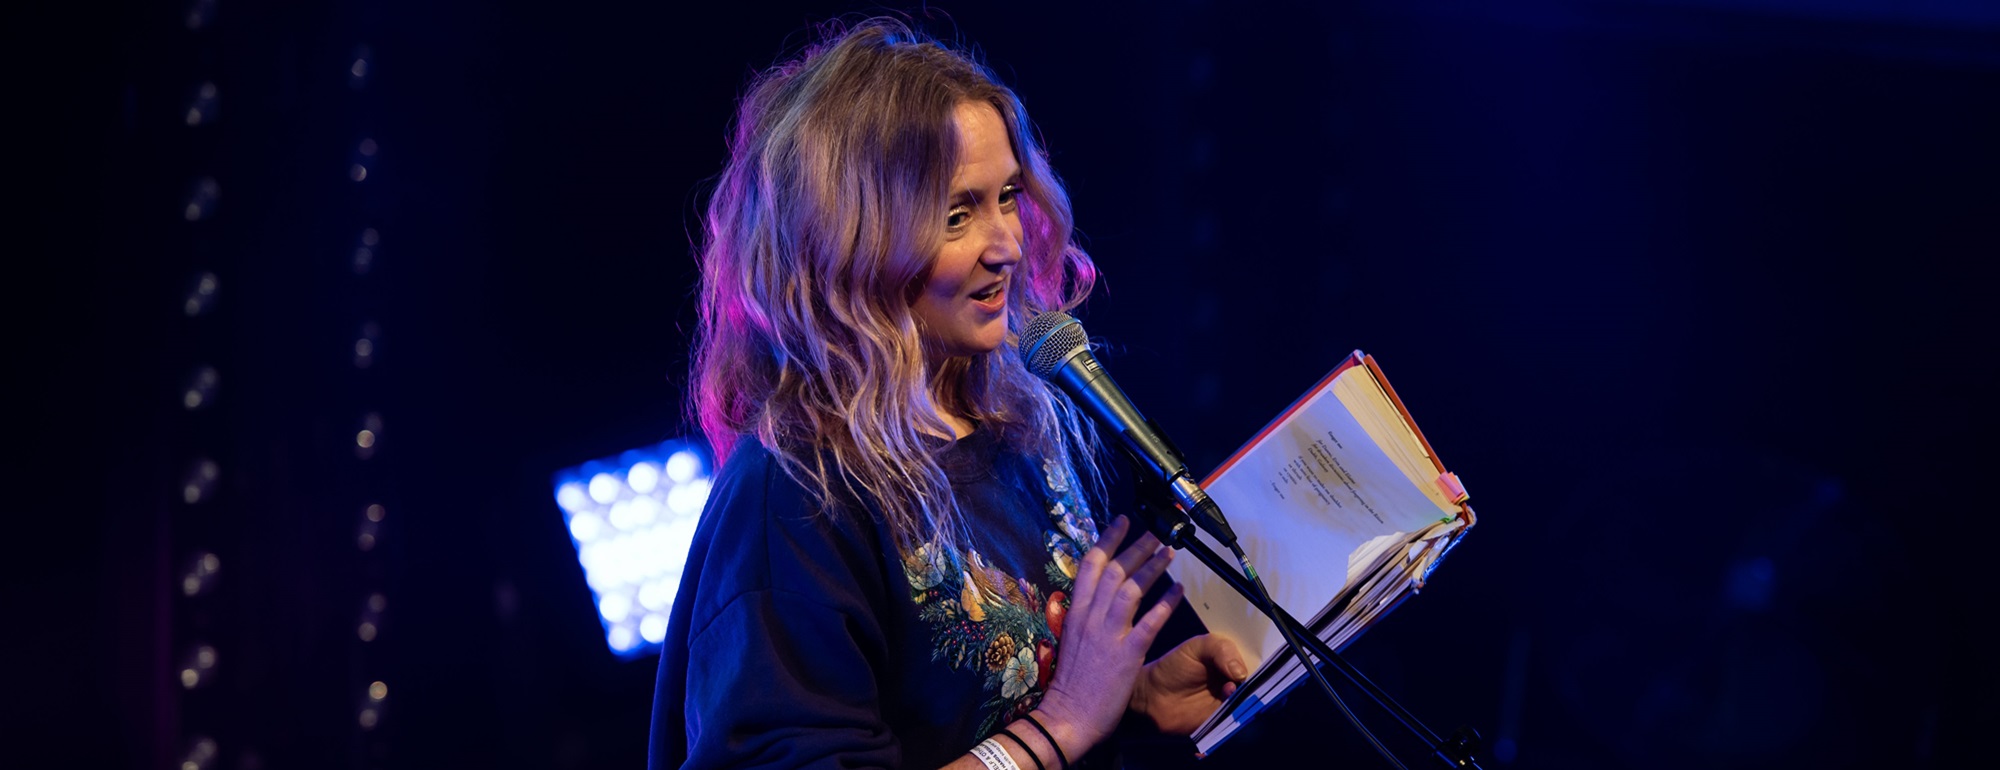 Hollie McNish reading from a book in front of a microphone